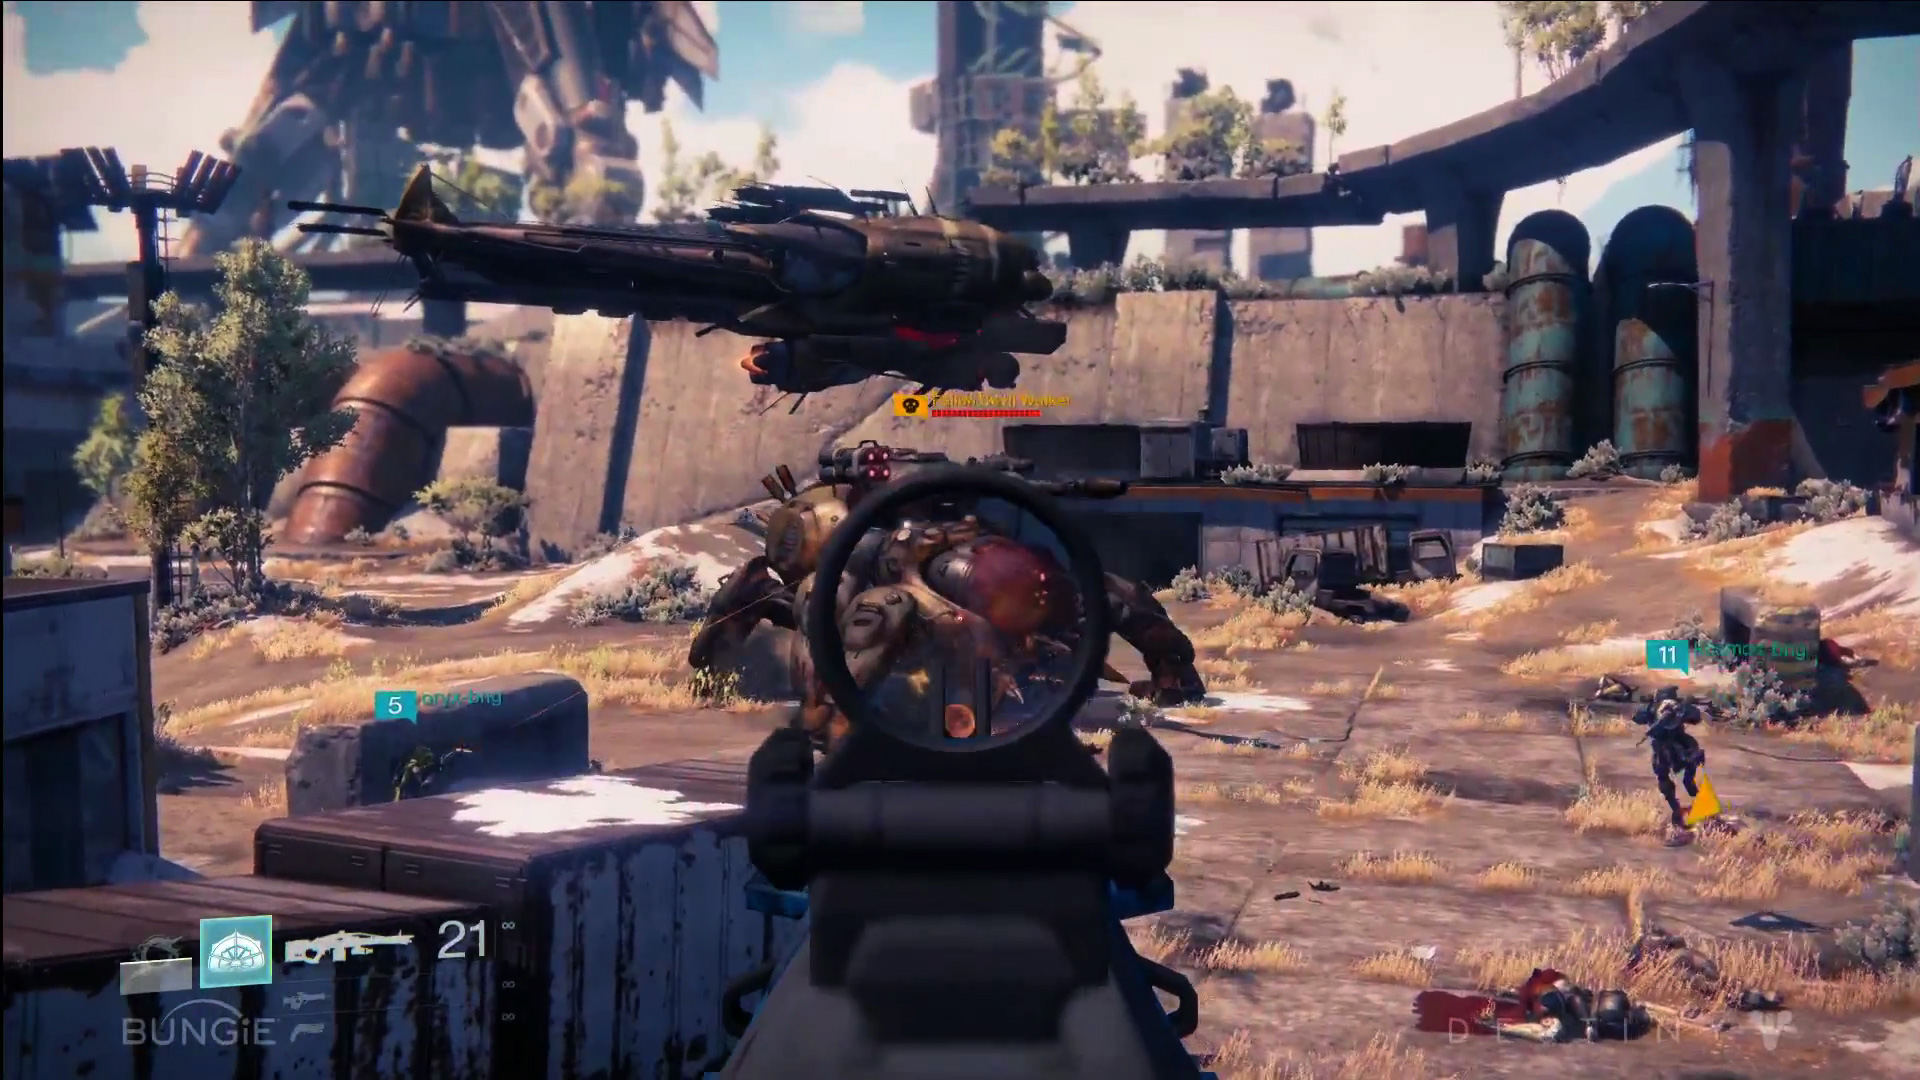 bungies-destiny-12-minutes-of-epic-gameplay-action-20.jpg